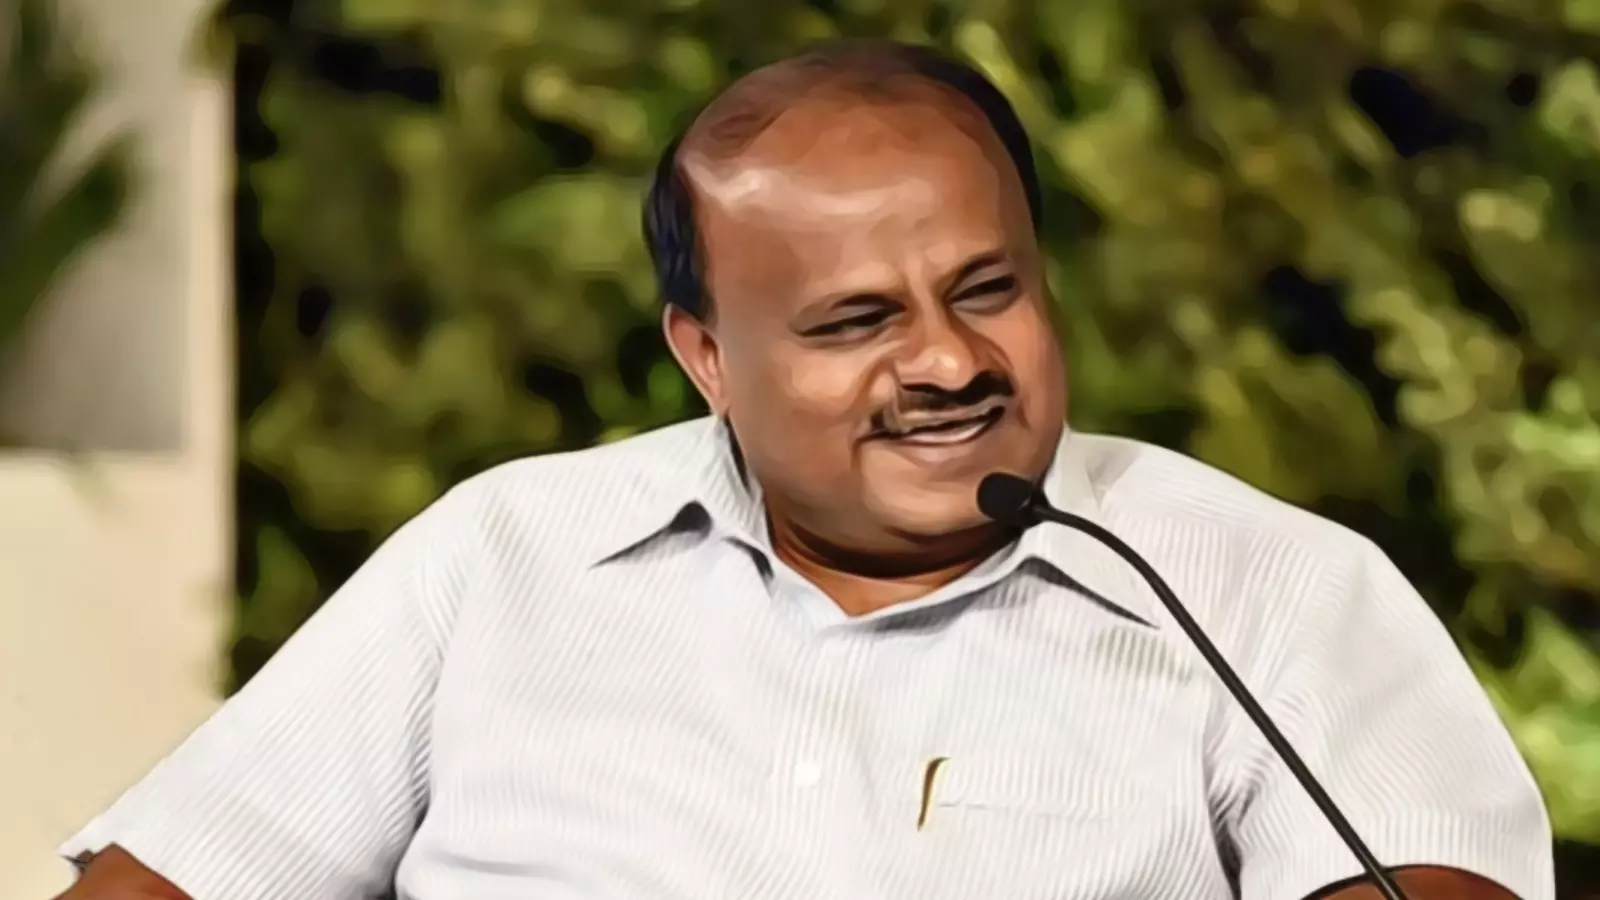 HD Kumaraswamy: Wily JD(S) leader with no ideological moorings, who can switch sides with ease